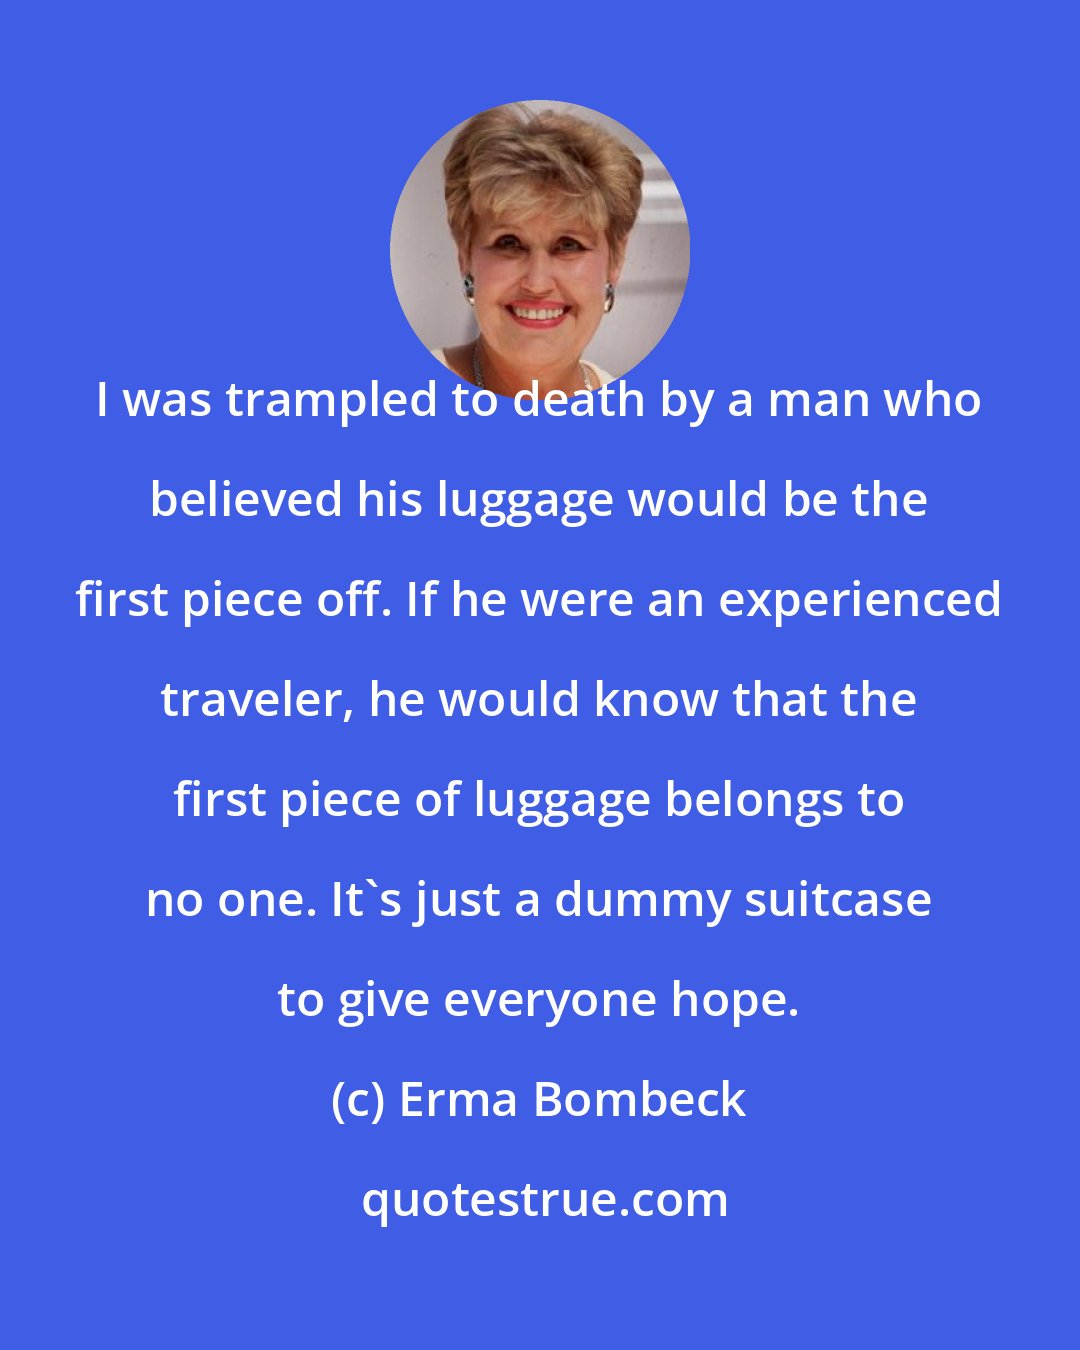 Erma Bombeck: I was trampled to death by a man who believed his luggage would be the first piece off. If he were an experienced traveler, he would know that the first piece of luggage belongs to no one. It's just a dummy suitcase to give everyone hope.